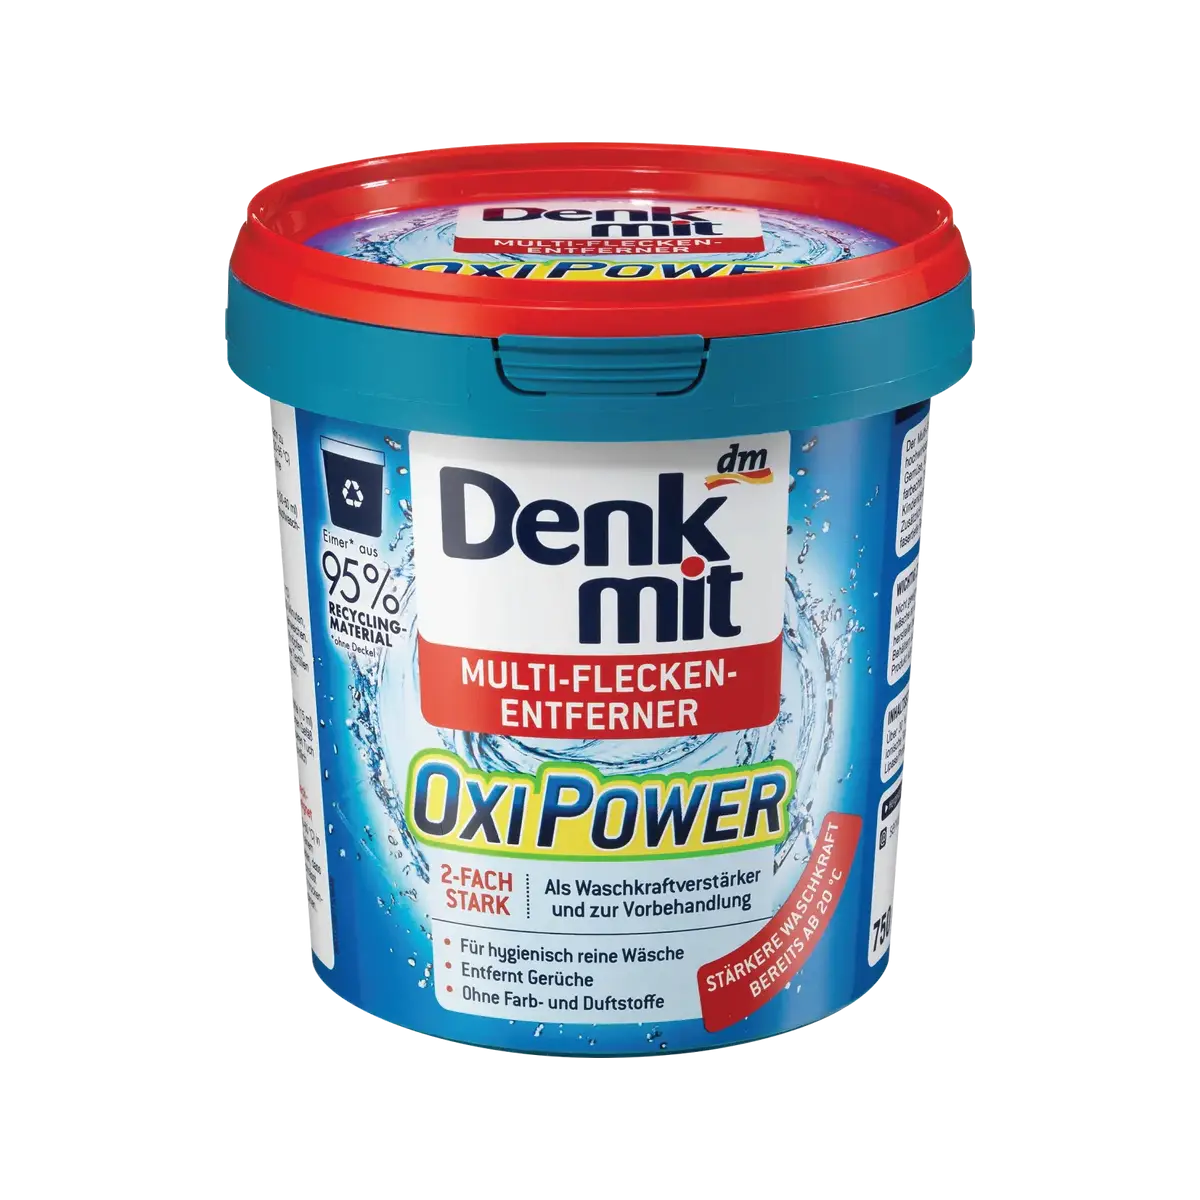 Oxi Power Stain Remover, 750 g